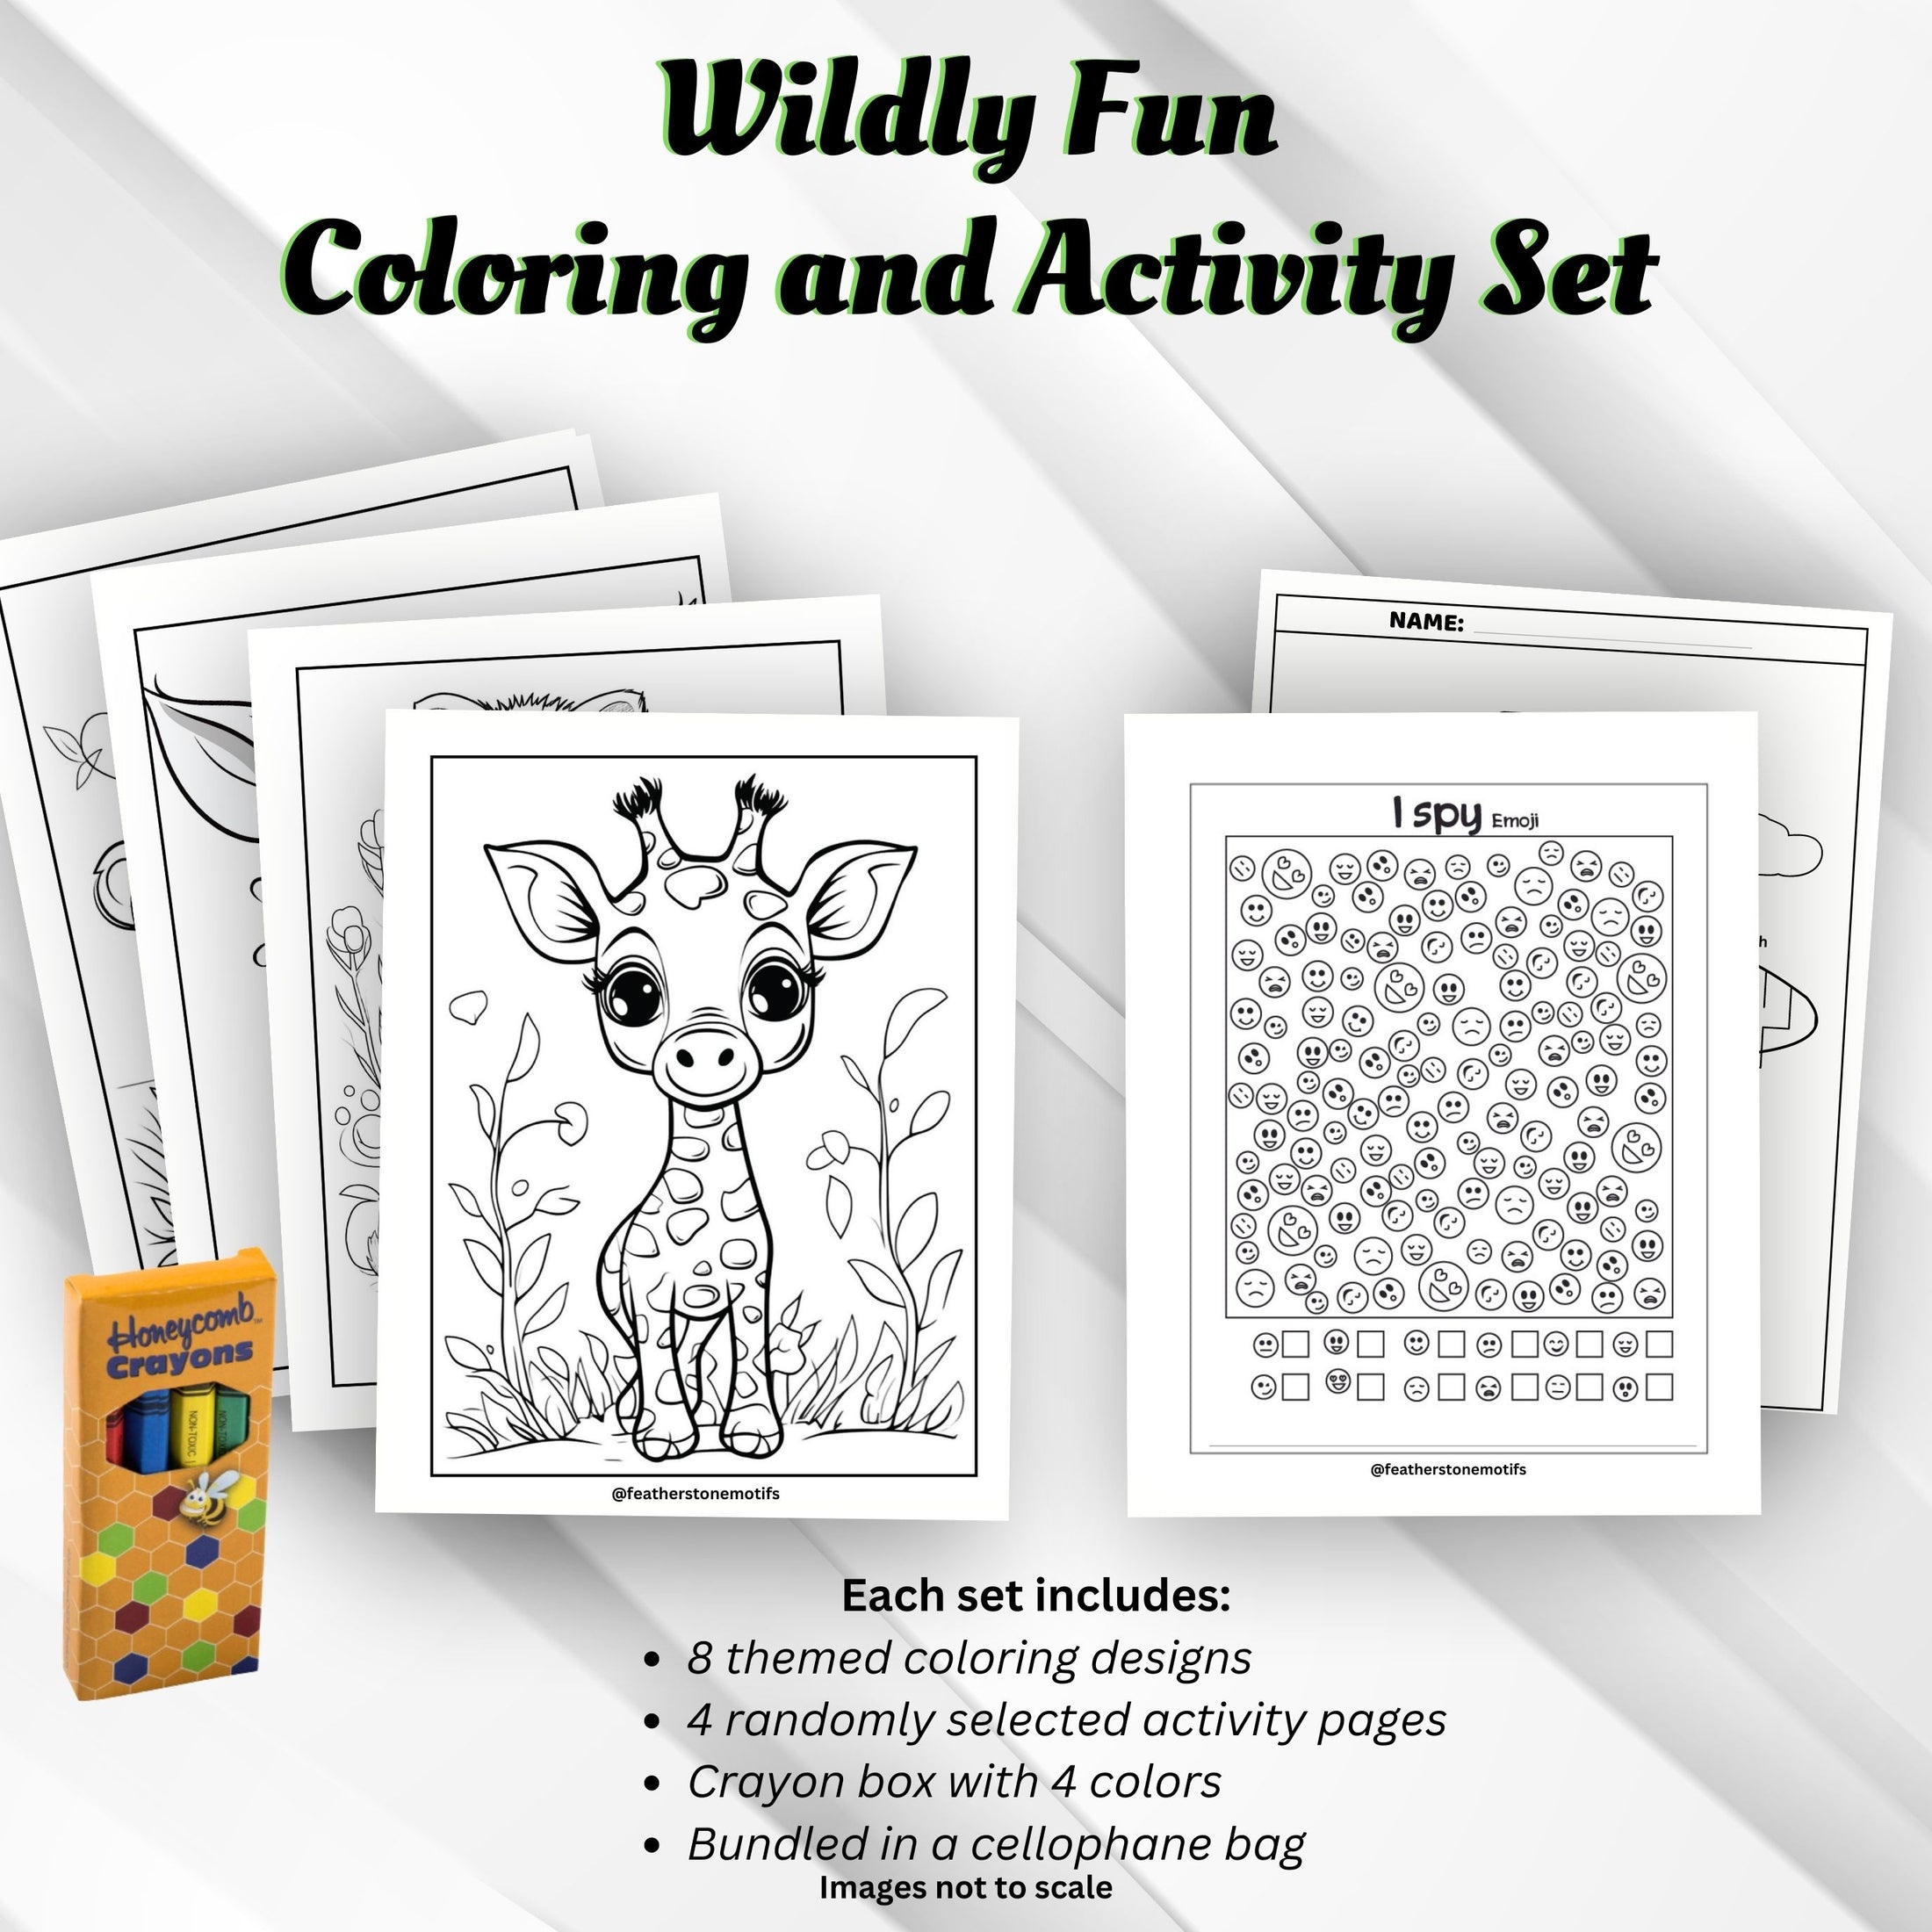 This image shows the Wildly Fun Coloring and Activity set with coloring pages, activity pages, and crayons.